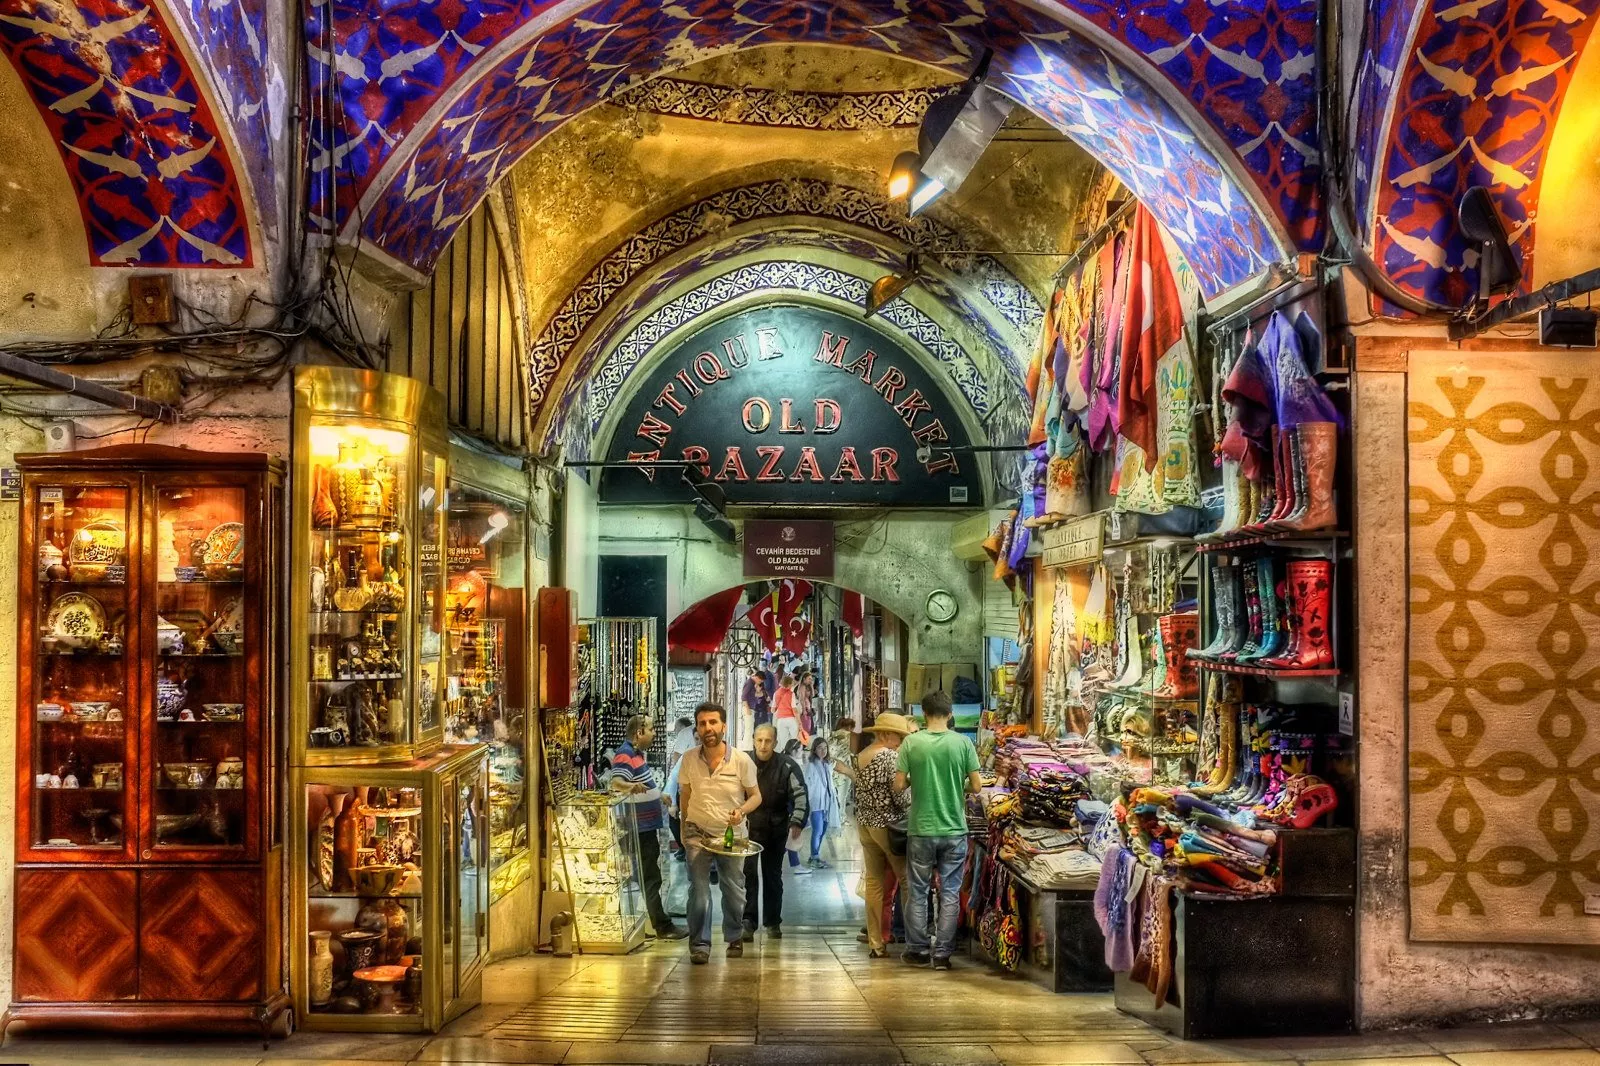 Grand Bazaar in Turkey, Central Asia | Architecture - Rated 5.2